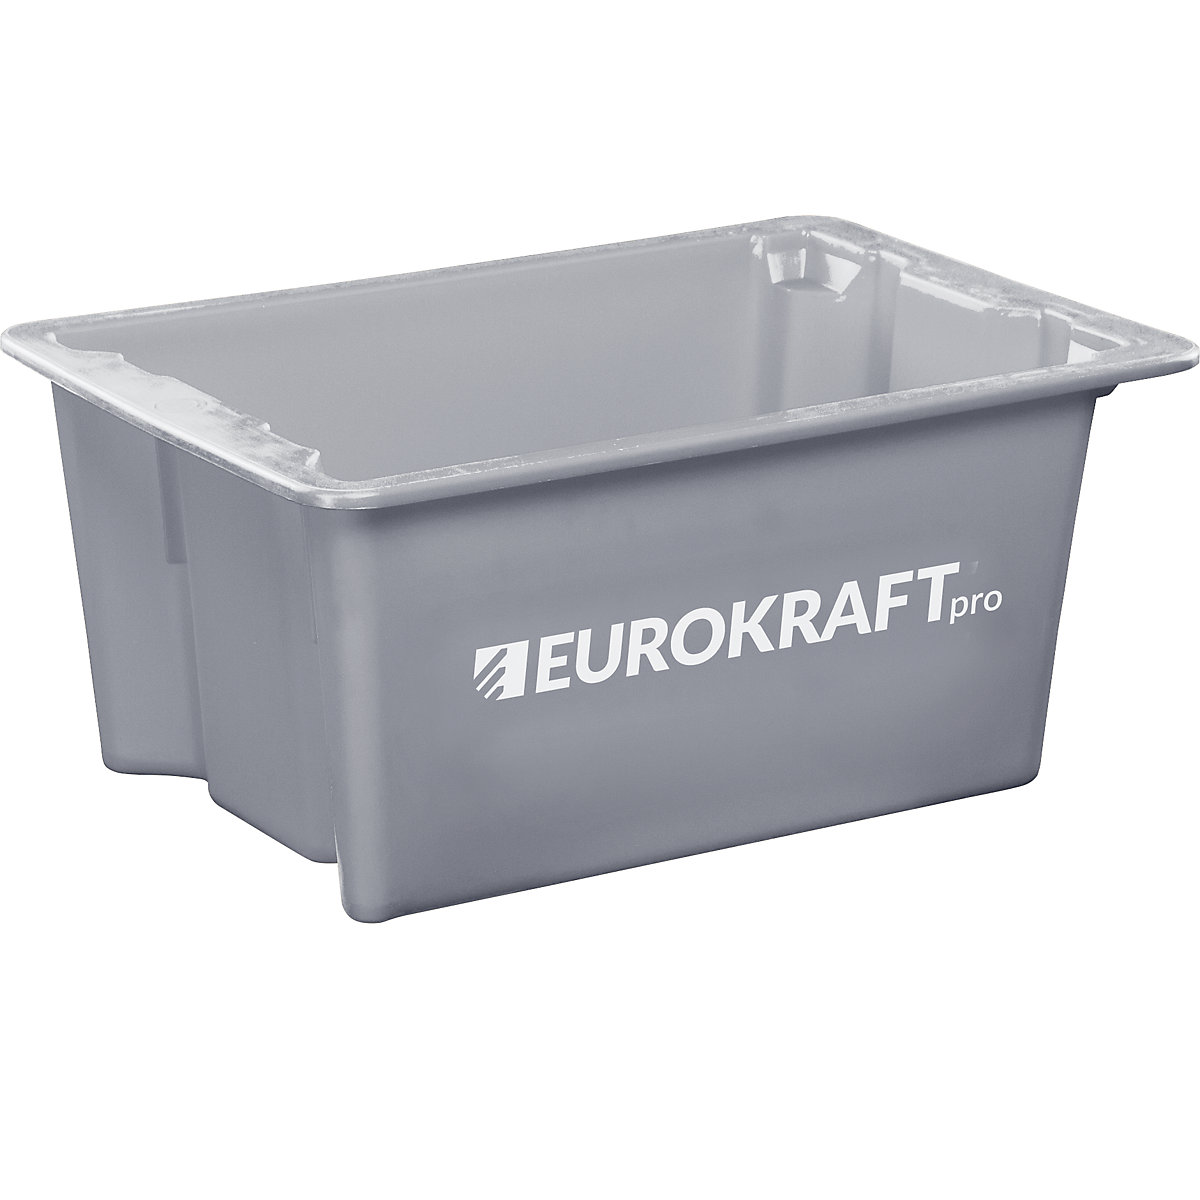 Stack/nest container made of polypropylene suitable for foodstuffs – eurokraft pro, capacity 6 l, pack of 4, solid walls and base, grey-5